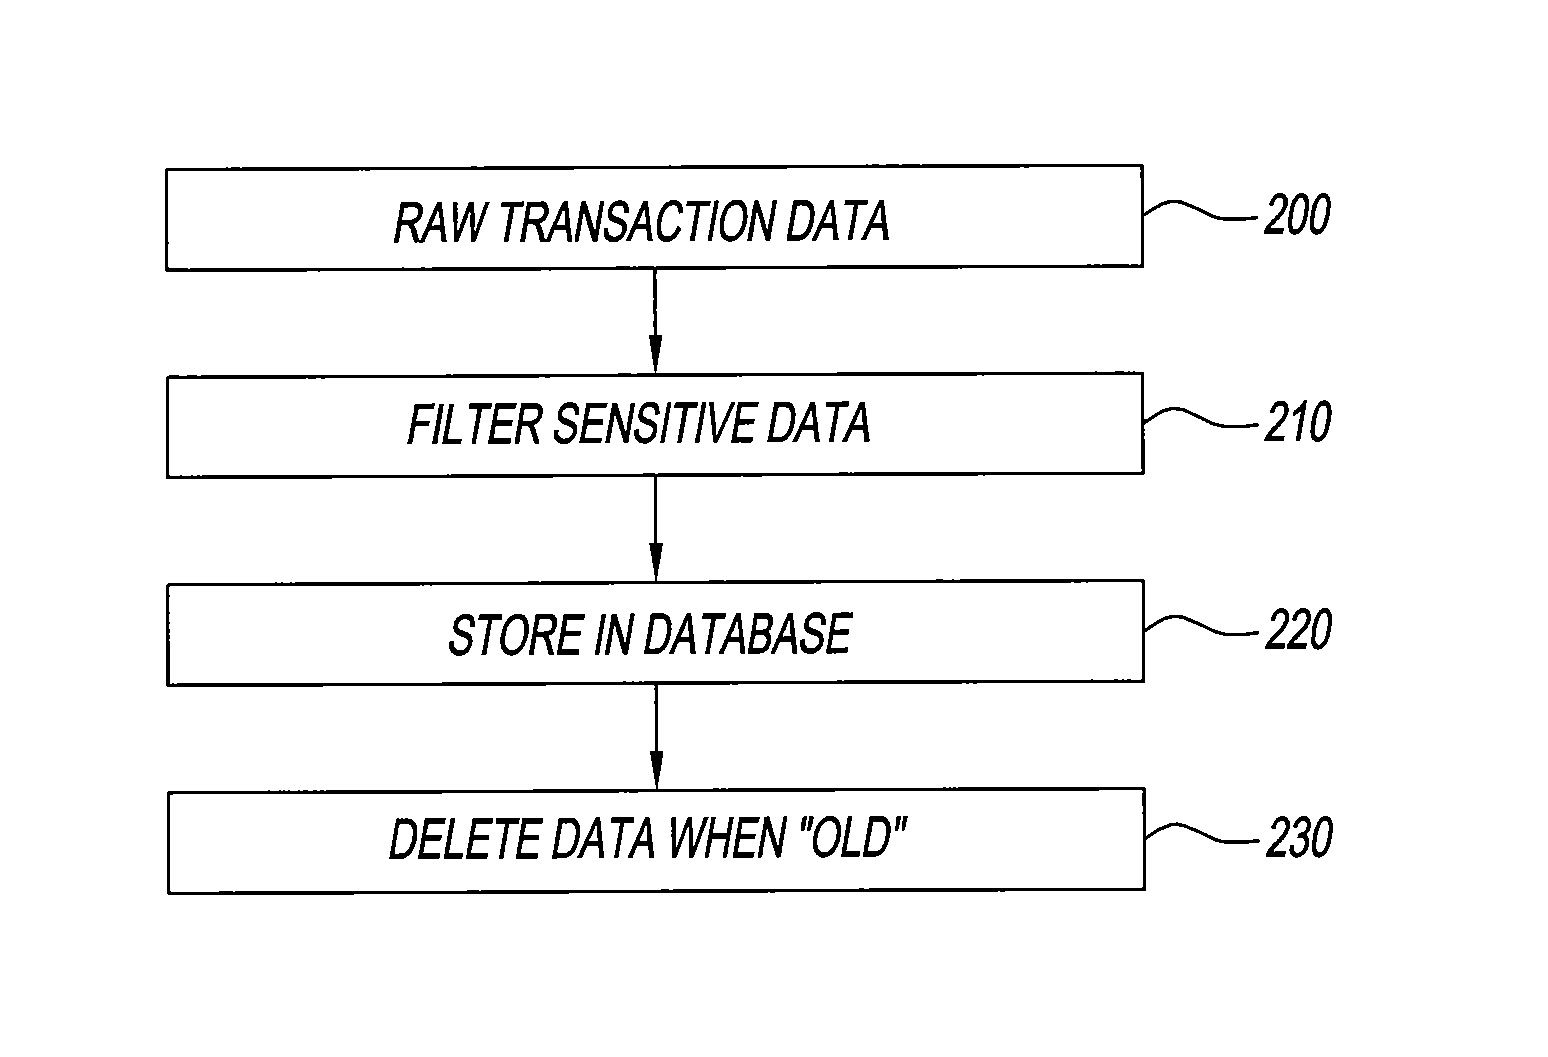 System and method for setting a hot product alert on transaction data